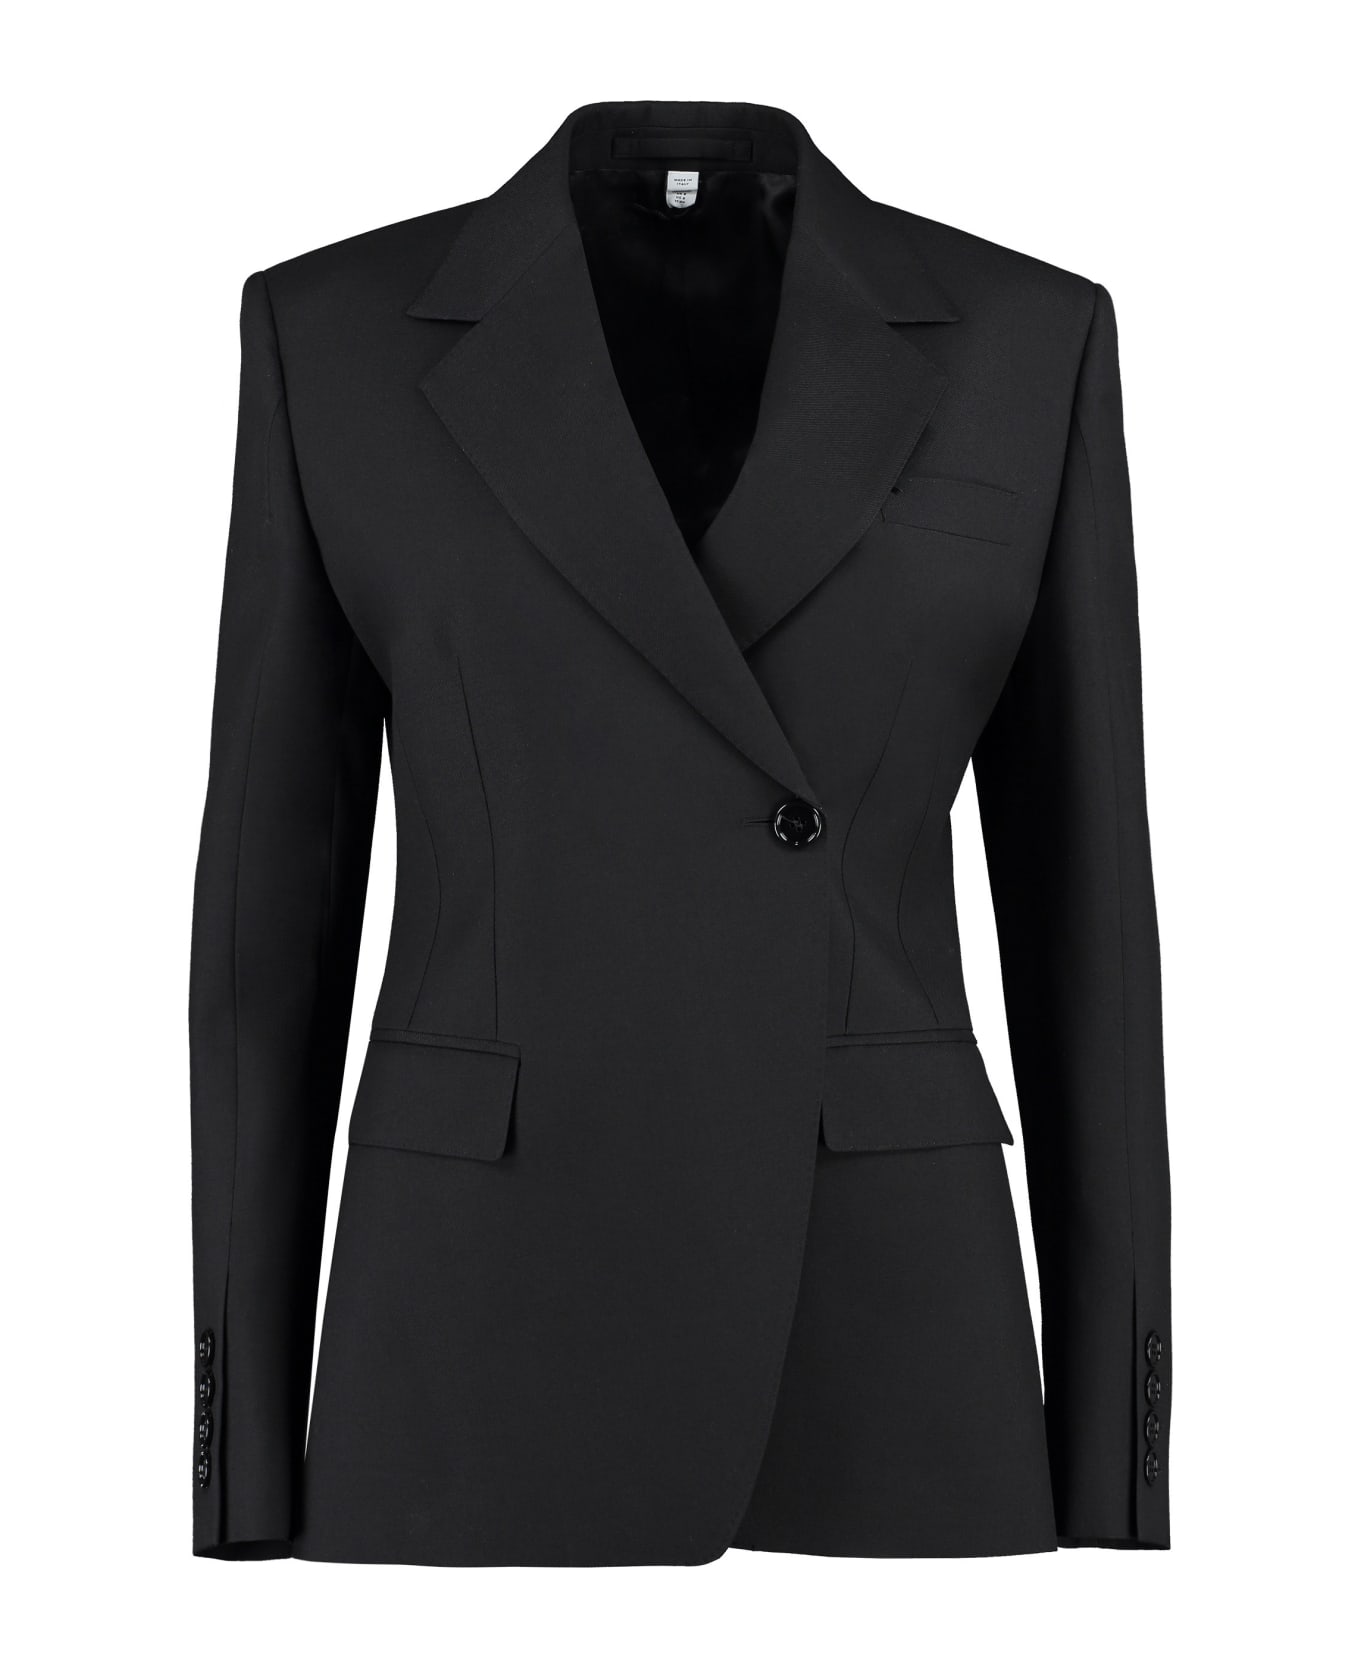 Burberry Double-breasted Wool Blazer - black ブレザー